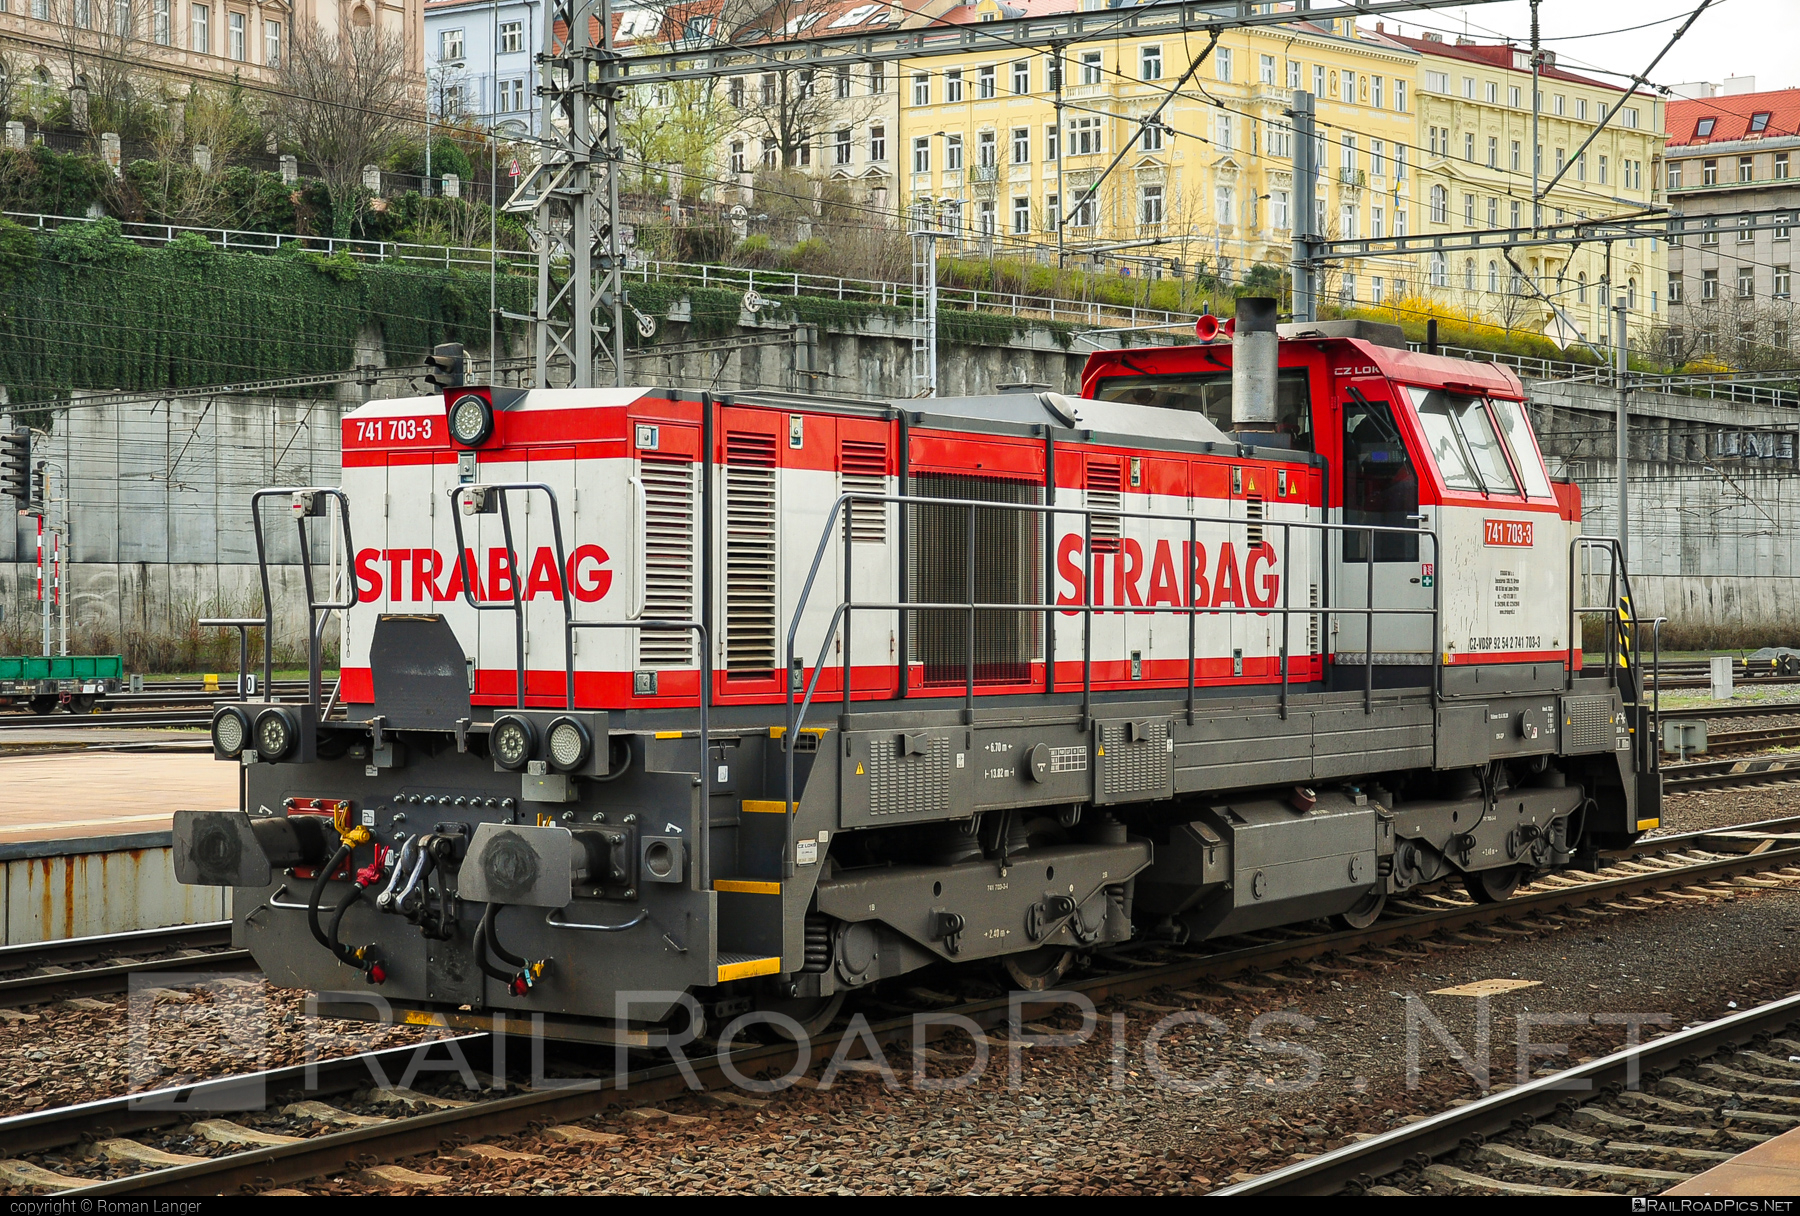 CZ LOKO Class 741.7 - 741 703-3 operated by STRABAG Rail a.s. #ViamontDSP #czloko #czloko7417 #locomotive7417 #strabag #strabagrail #strabagrailas #vdsp #viamont